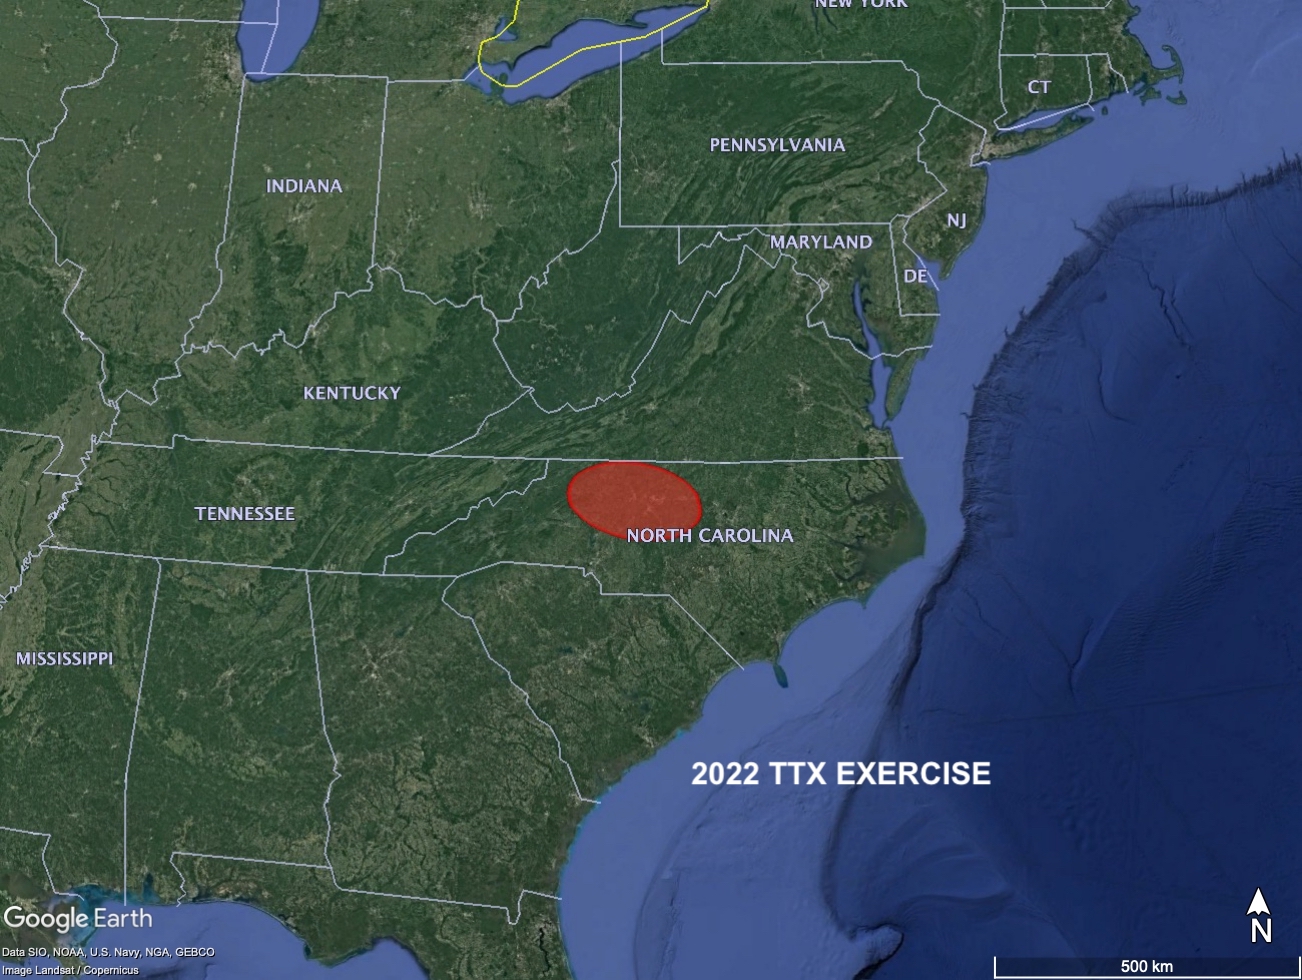 This image shows the predicted impact region for 2022 TTX, as of June 15, 2022